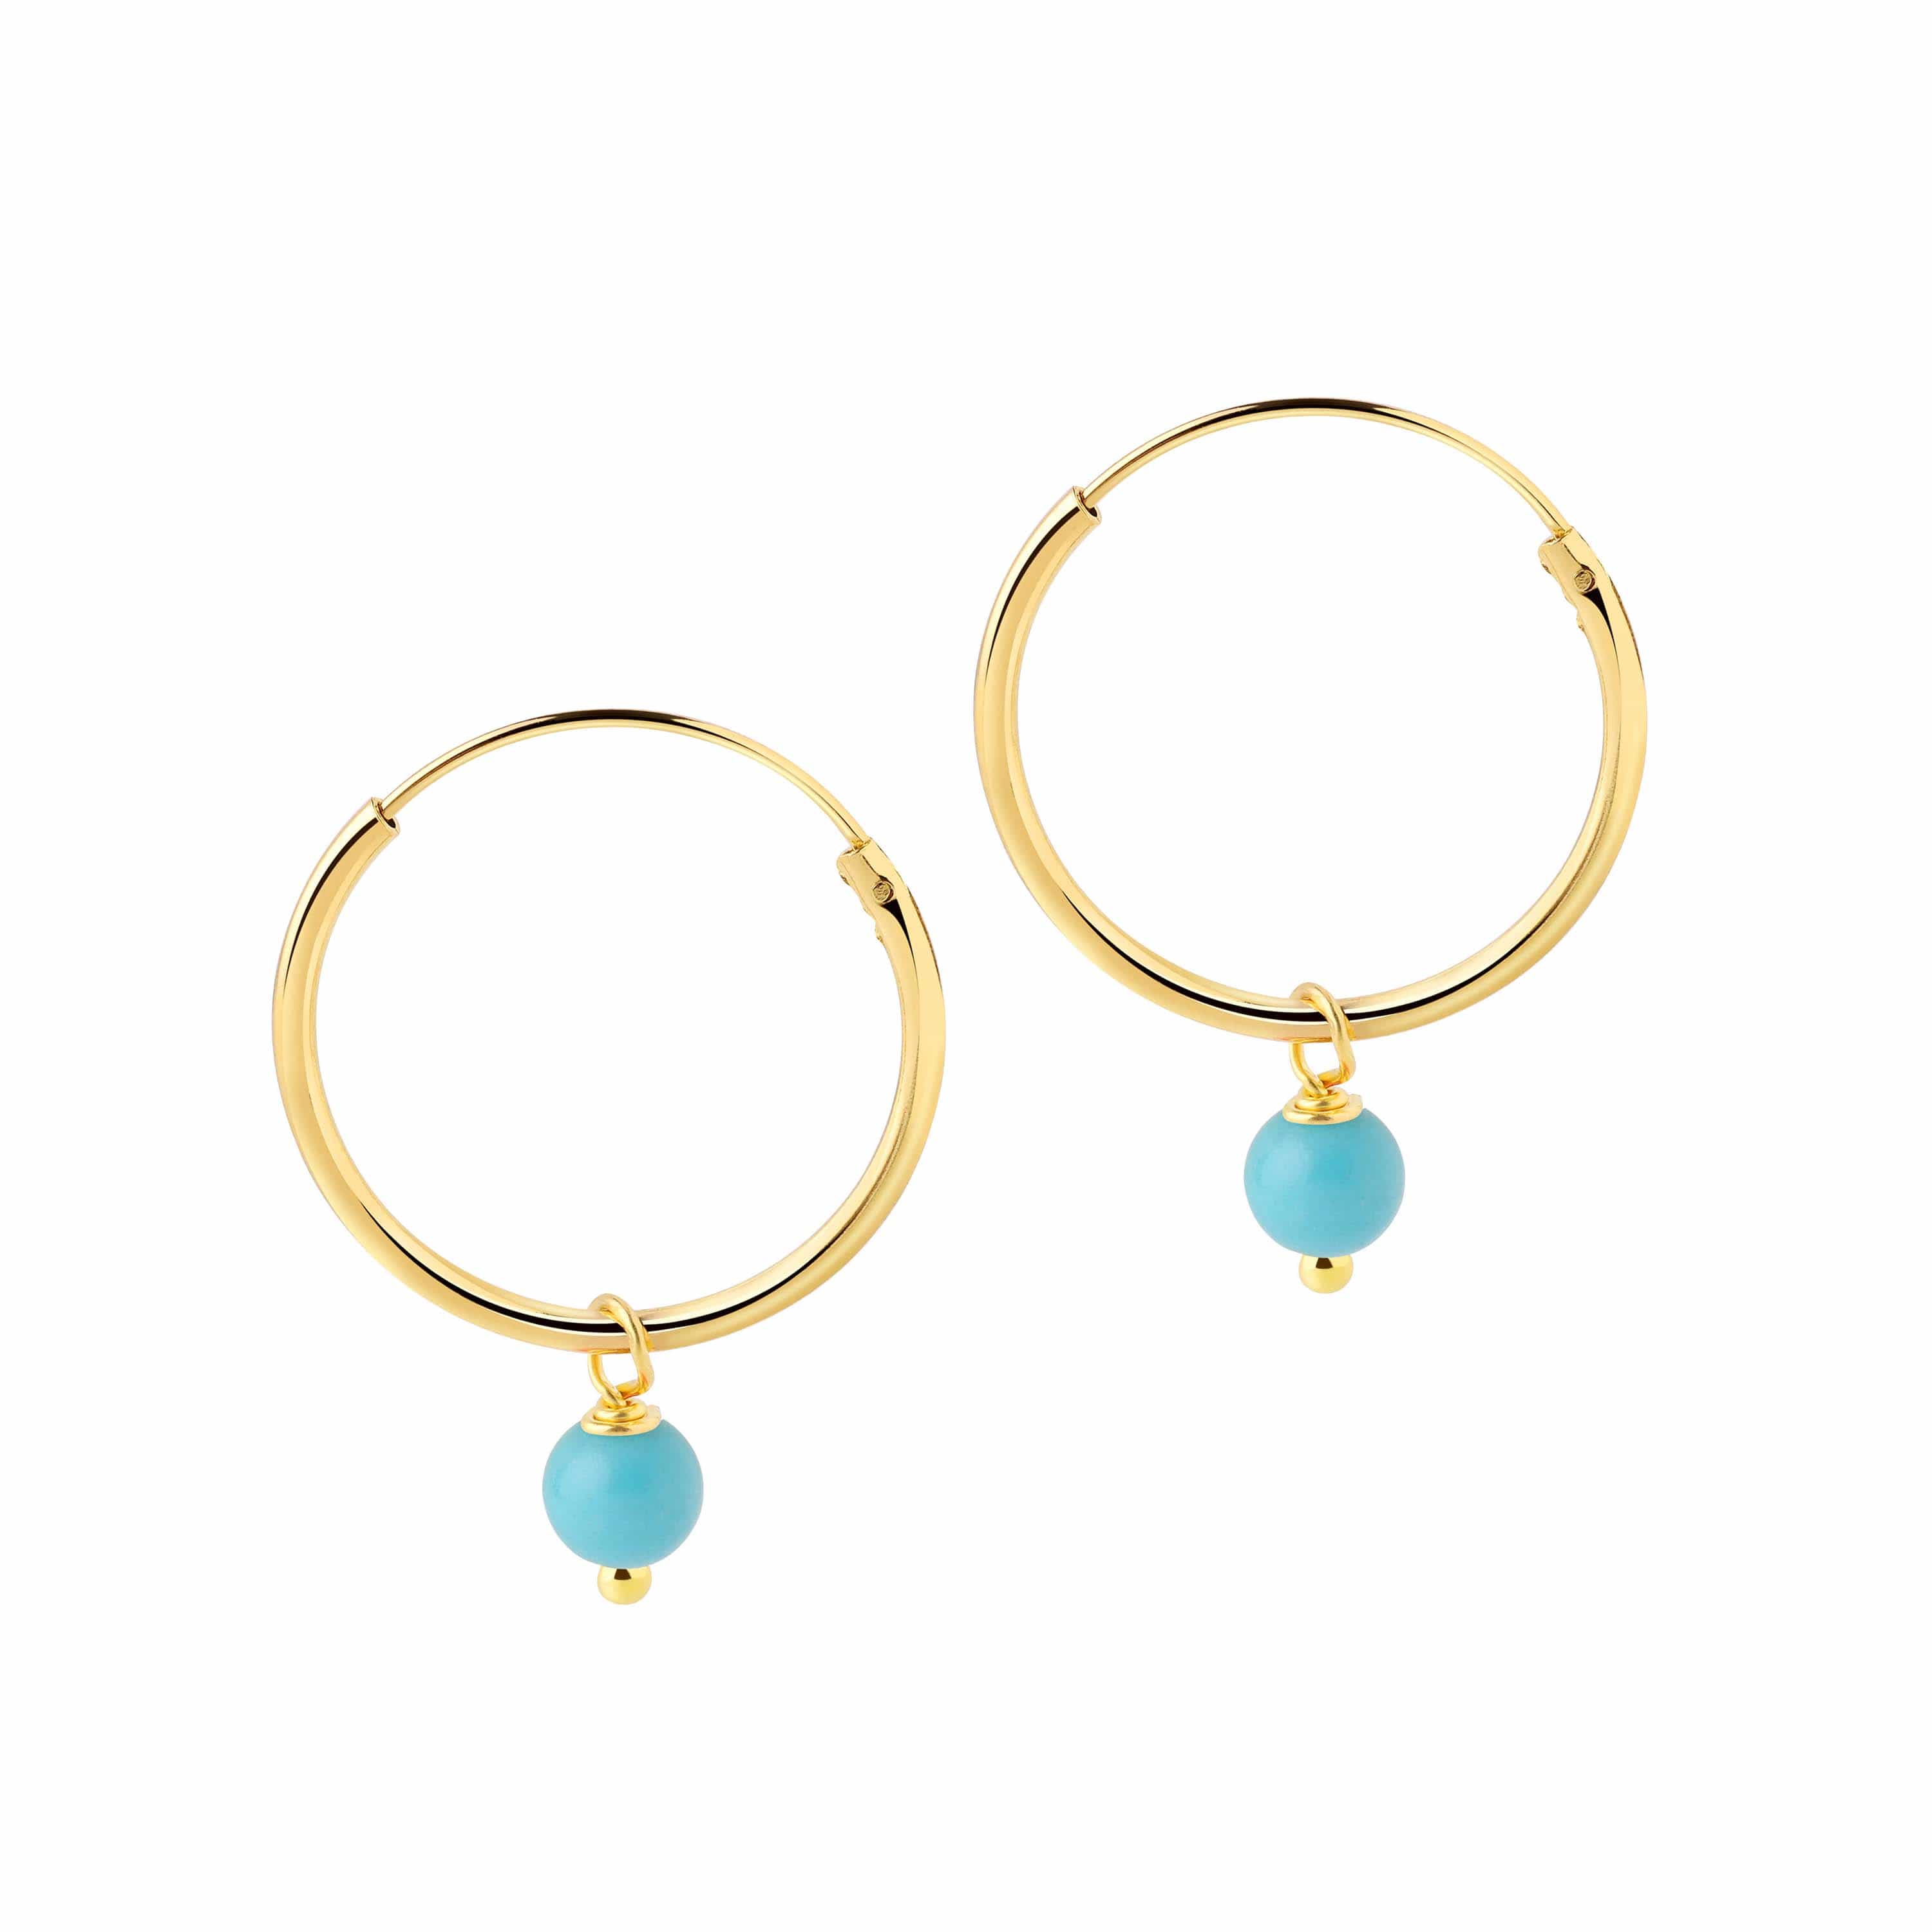 Medium Gold Plated Hoop Earrings with Turquoise Blue Stone